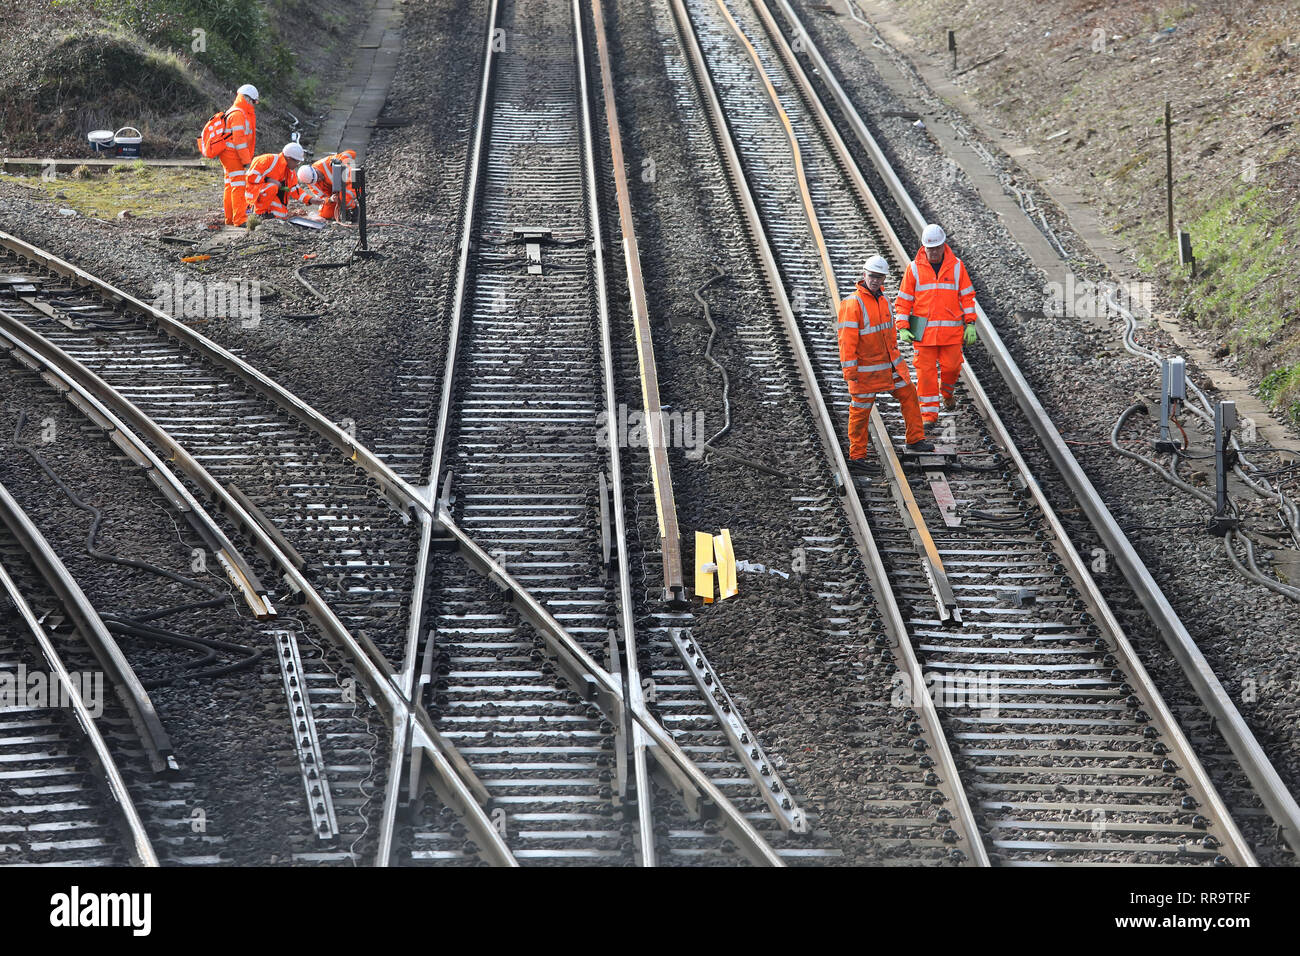 Railway engineers work on the track at the Southern end of the Brighton Main Line. The improvement works on the Brighton Main Line are a key part of a £300 million government-funded programme to tackle delay hotspots and boost the reliability of the railway in the south east, including the expanded Thameslink network. The Brighton Main Line is a key rail route, connecting Gatwick Airport and the south coast with London, and is used by 300,000 people each day. 20 February 2019 Stock Photo